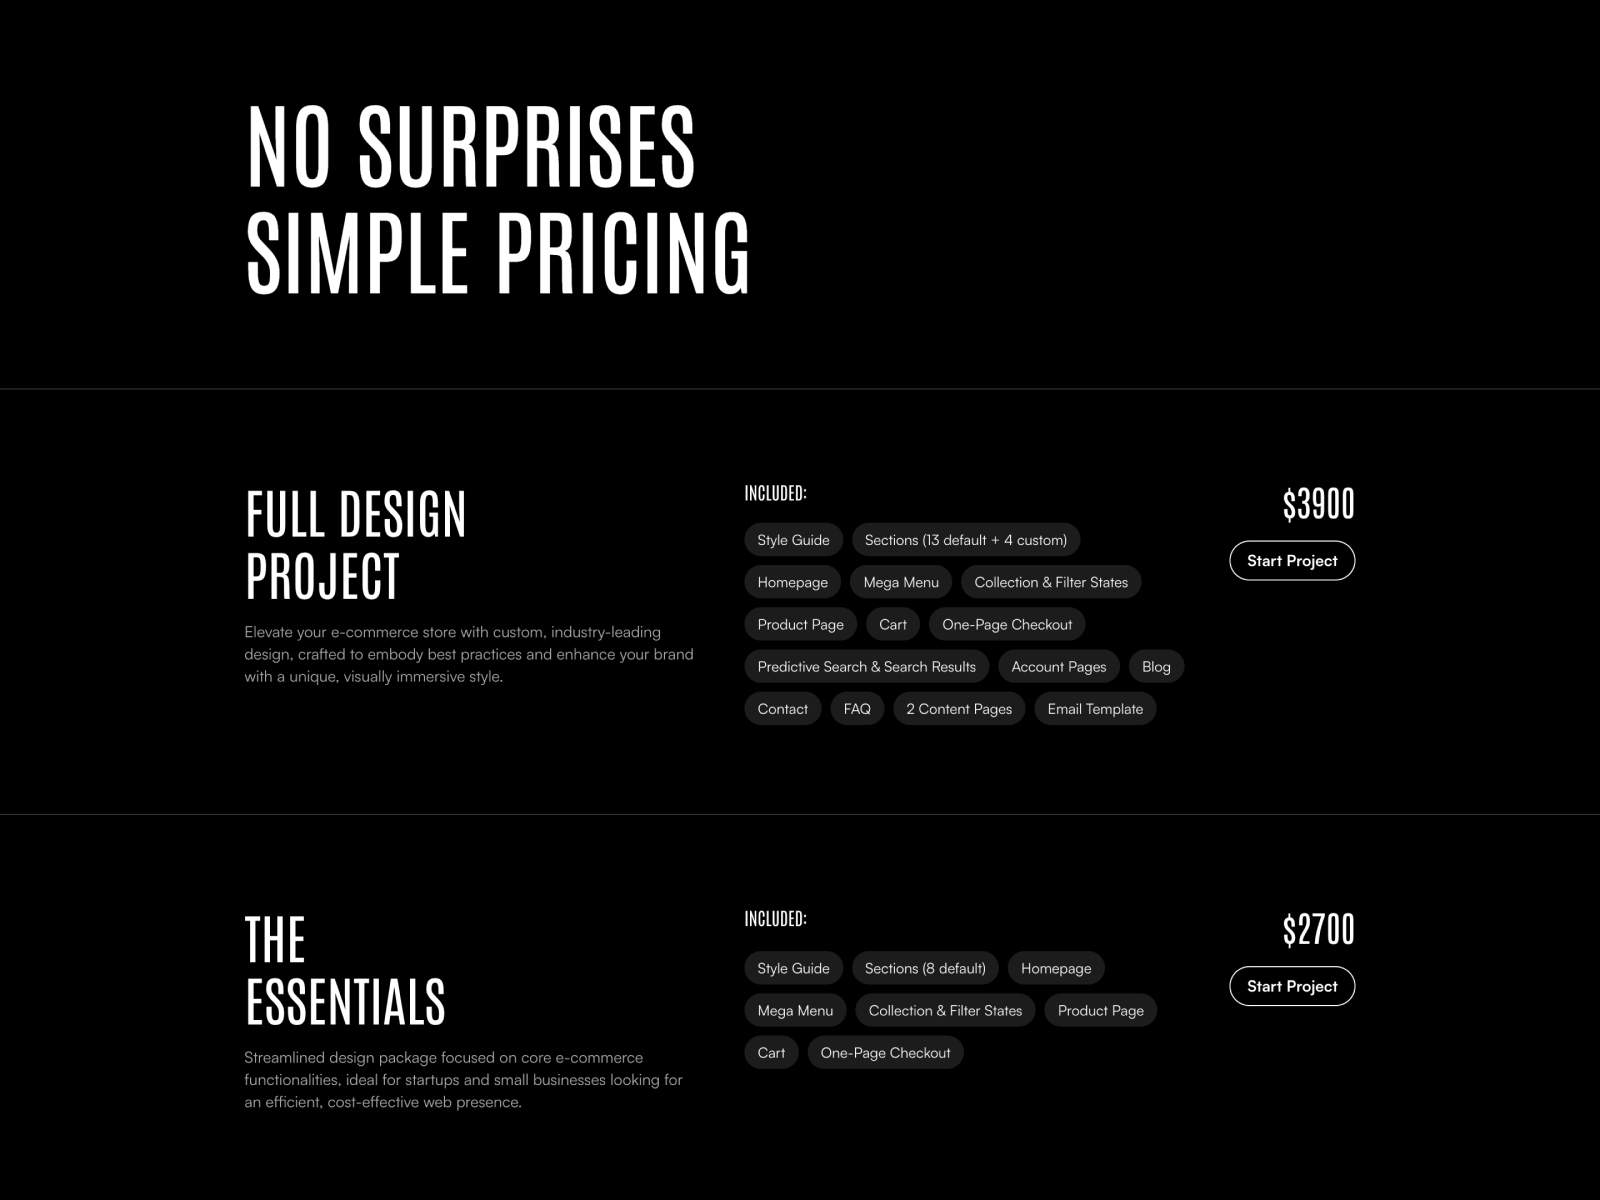 Pricing/Plans